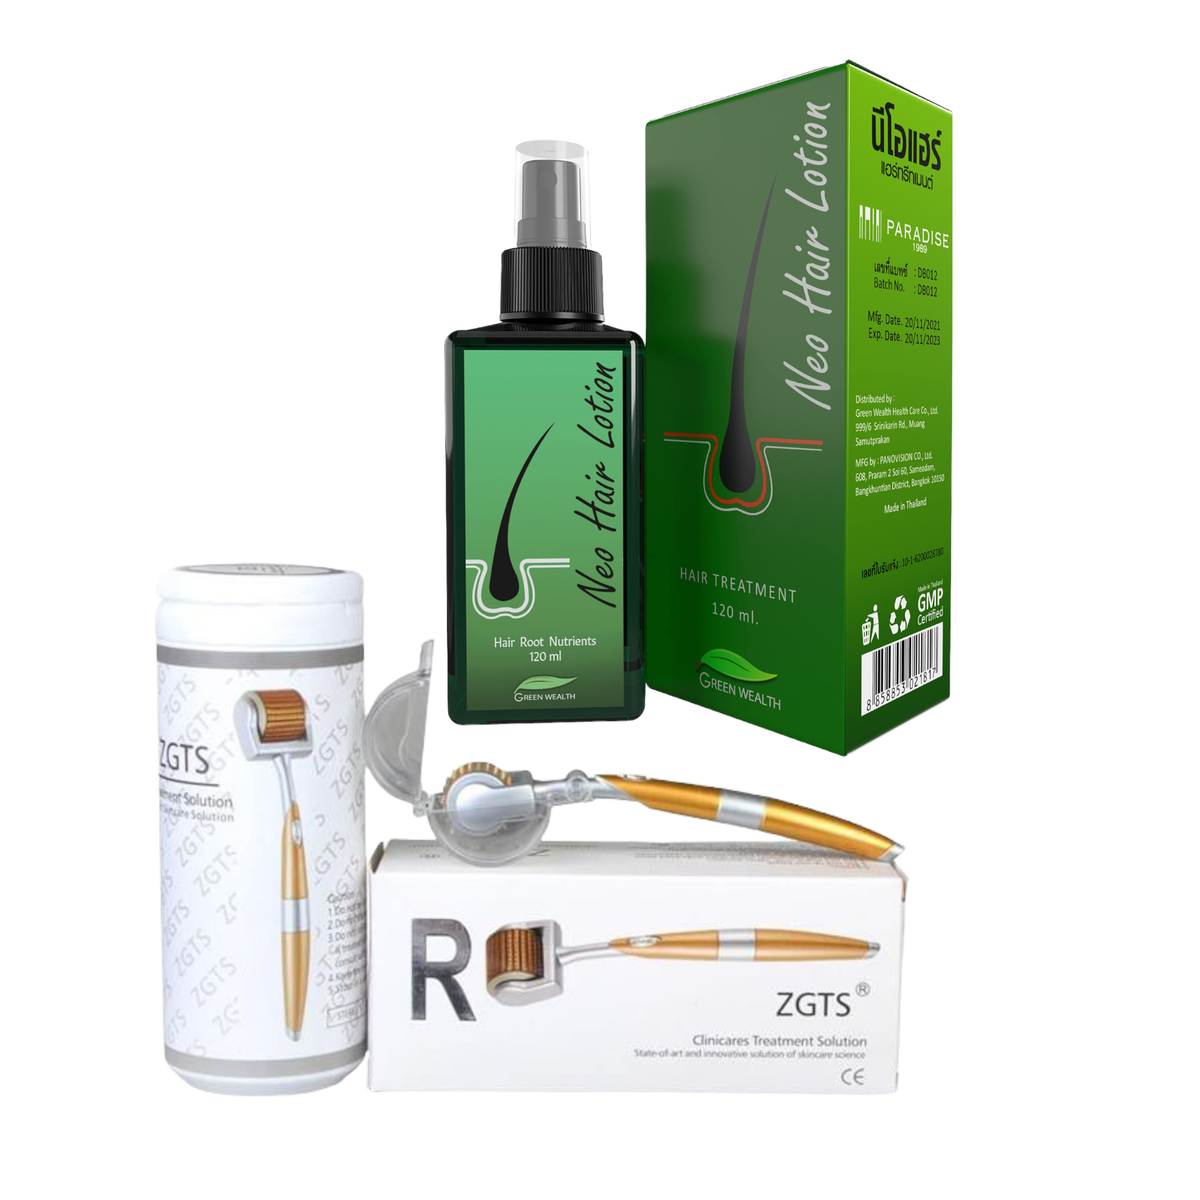 Neo Hair Lotion 120ml with ZGTS Clinicare Derma Roller Set by Parisetc |  Buy Online in South Africa | takealot.com